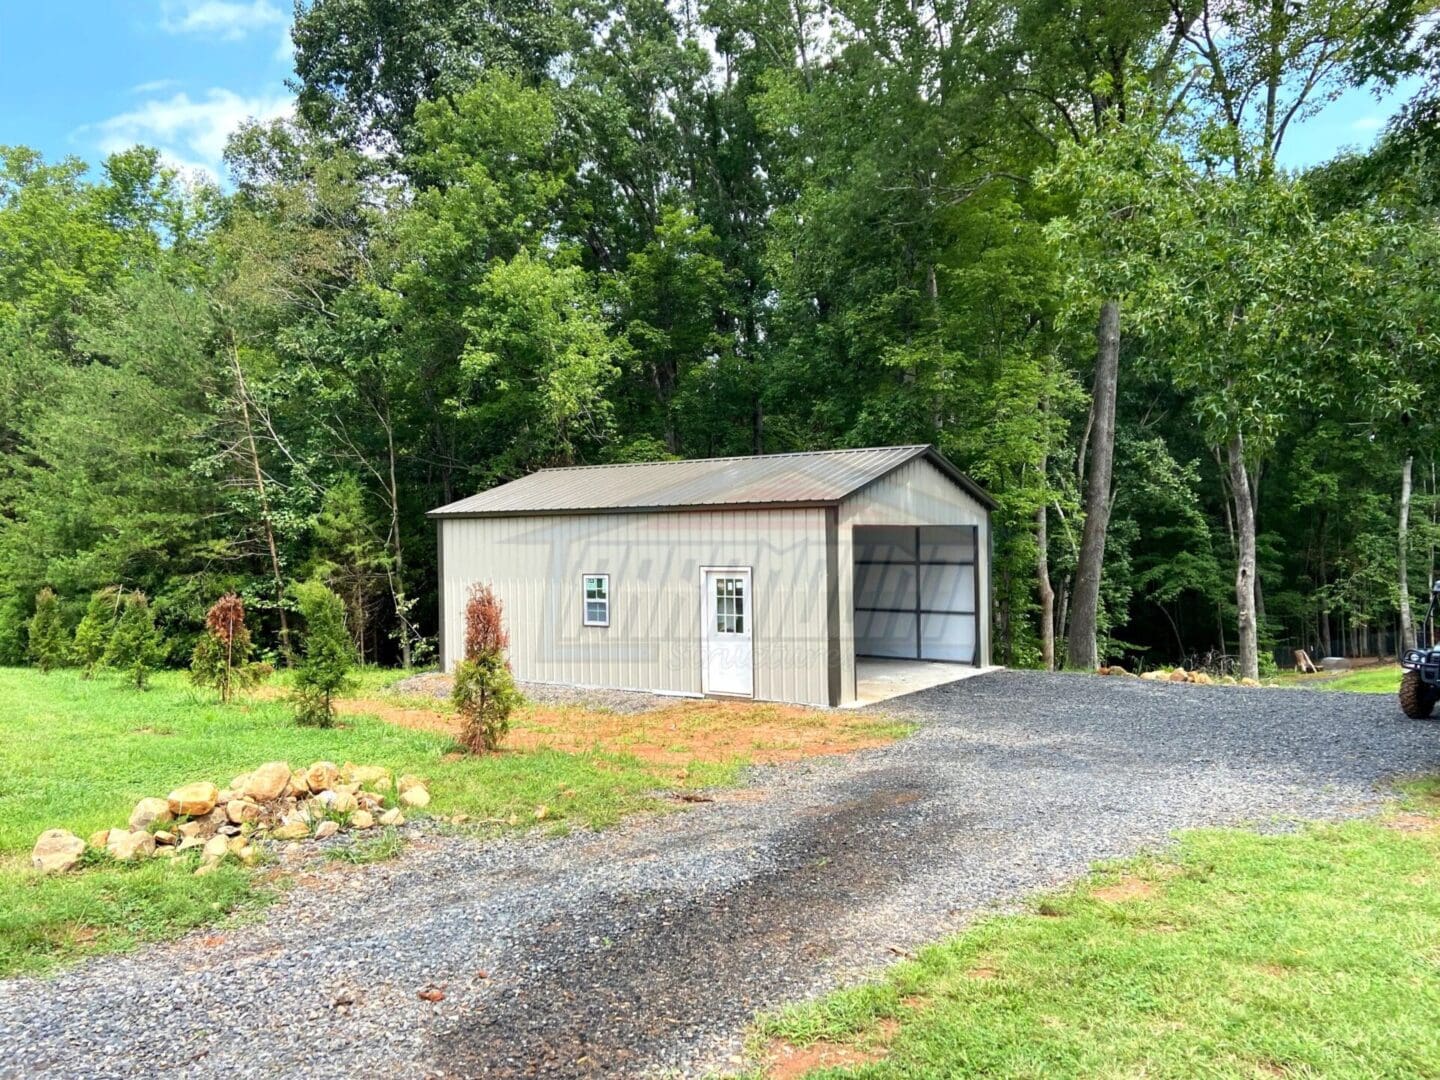 A small garage with a metal door and a gravel driveway.